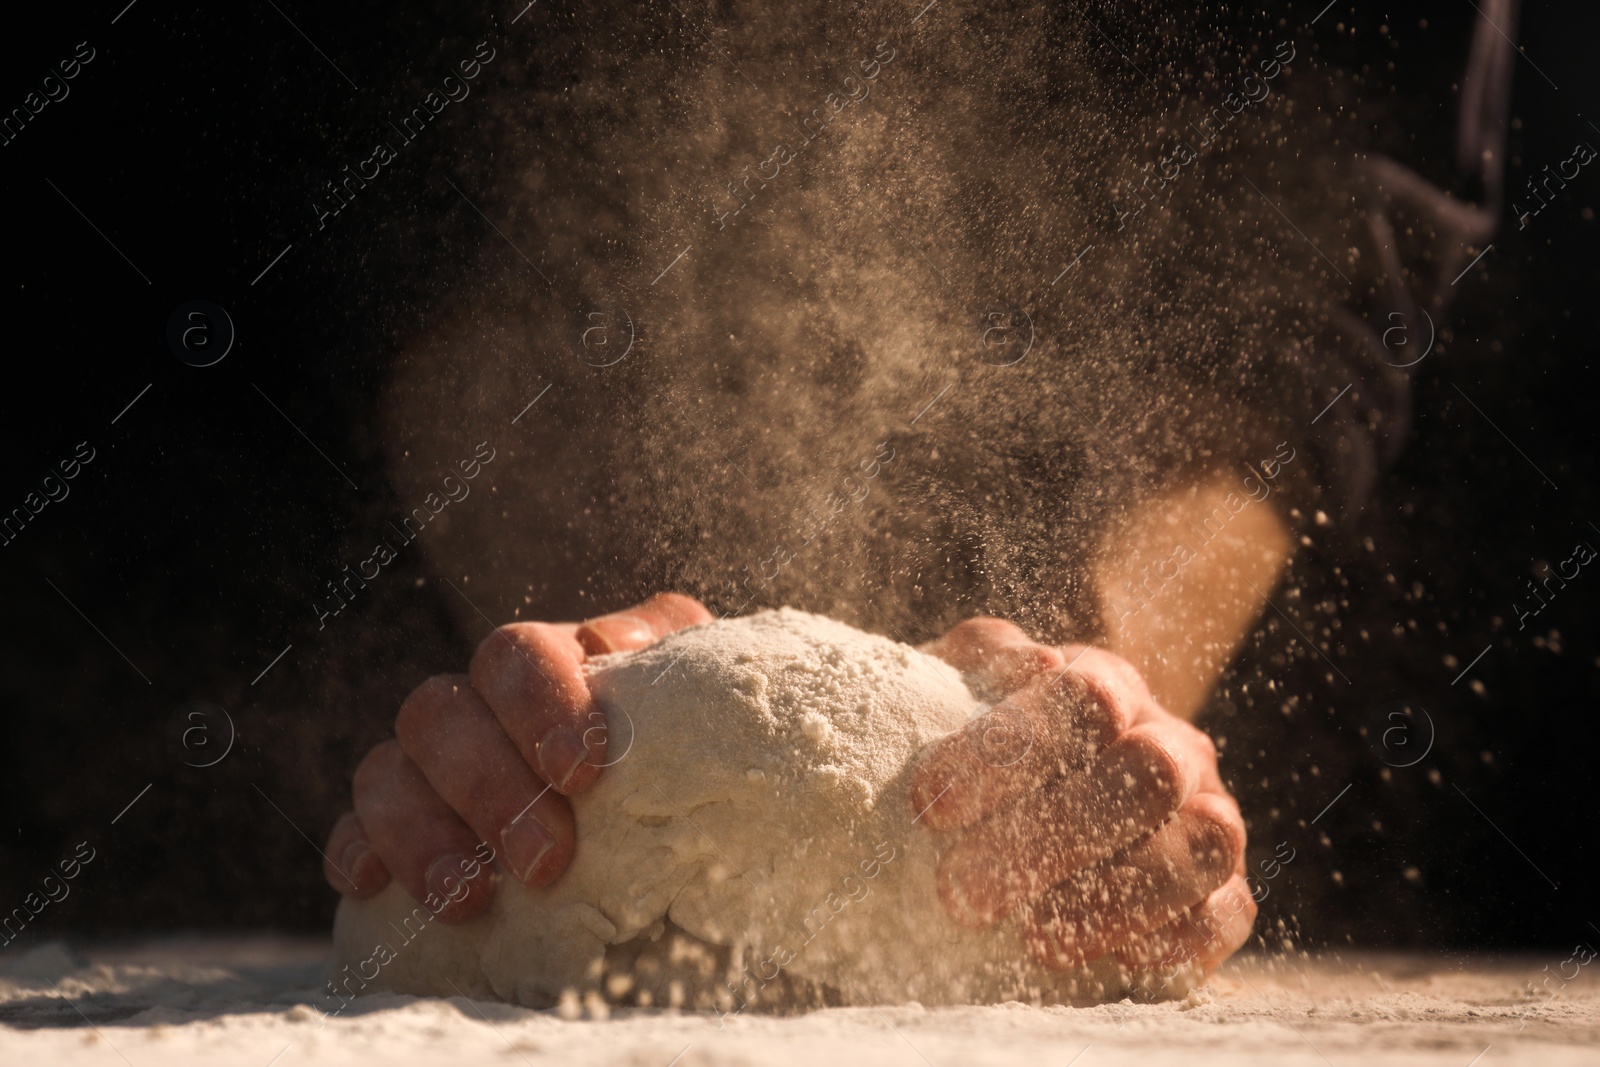 Photo of Making bread. Woman kneading dough at table on dark background, closeup